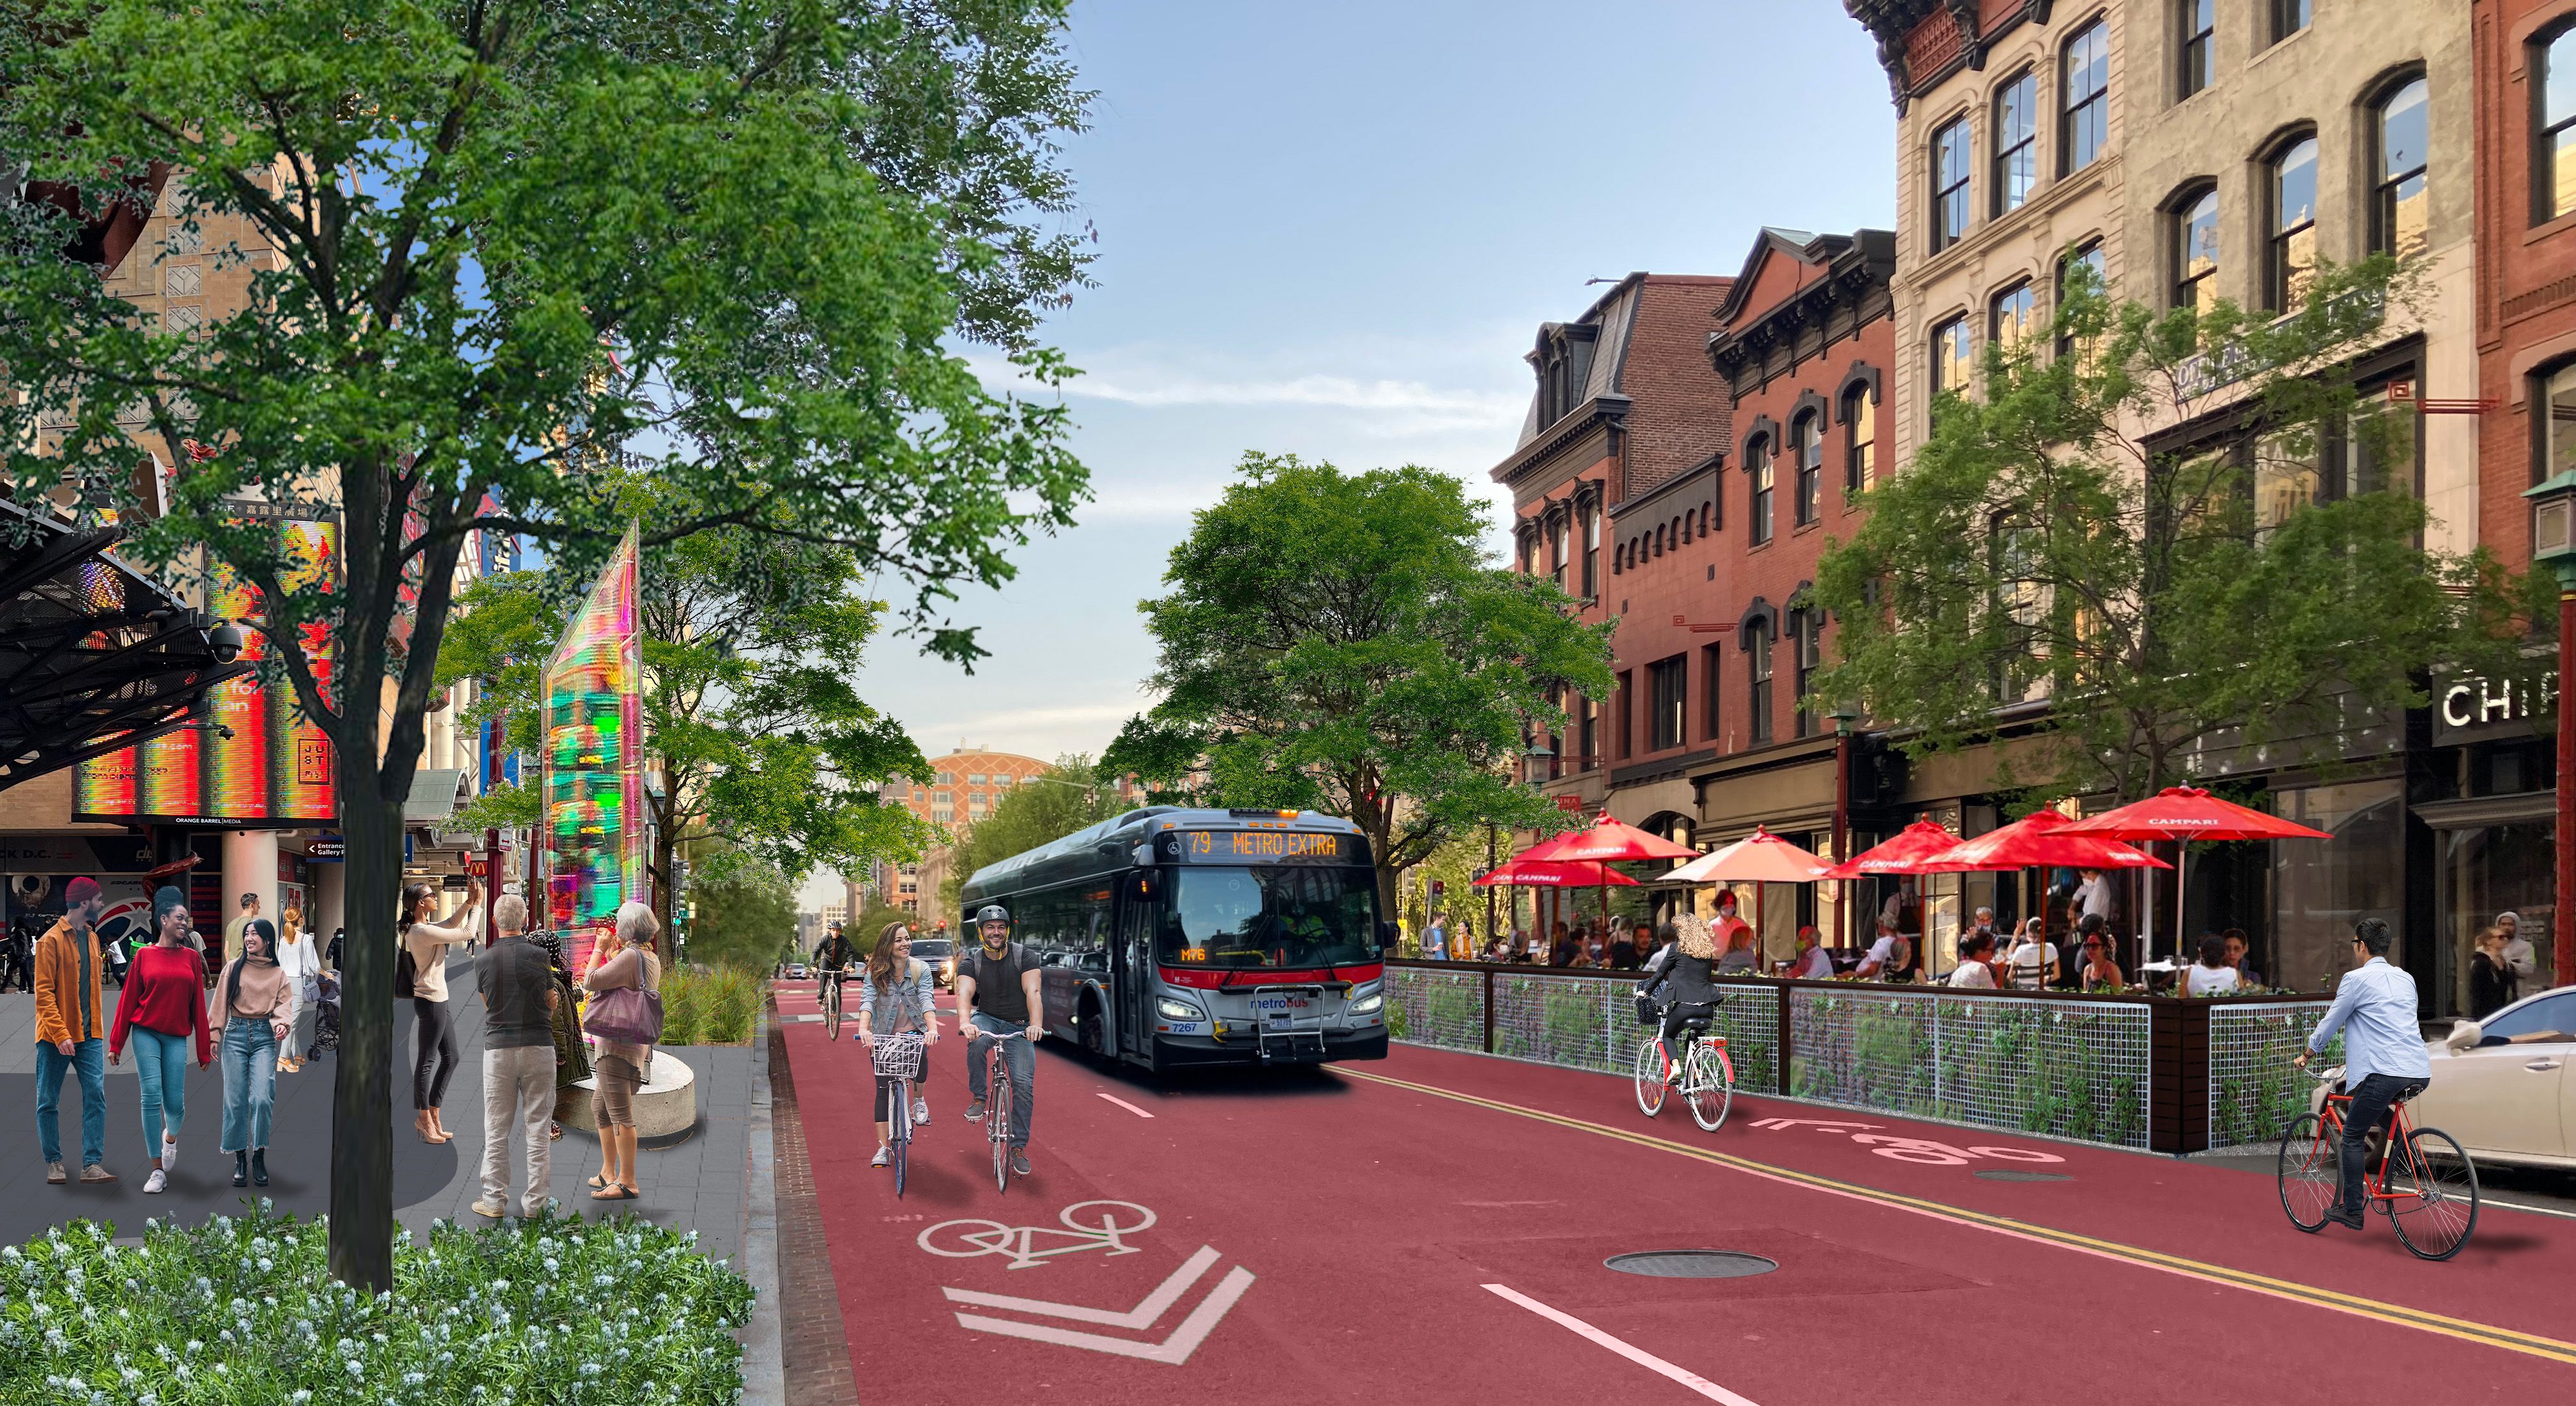 A rendering of 7th Street features cyclists, a bus on a bus lane, and people dining outside on a streeterie